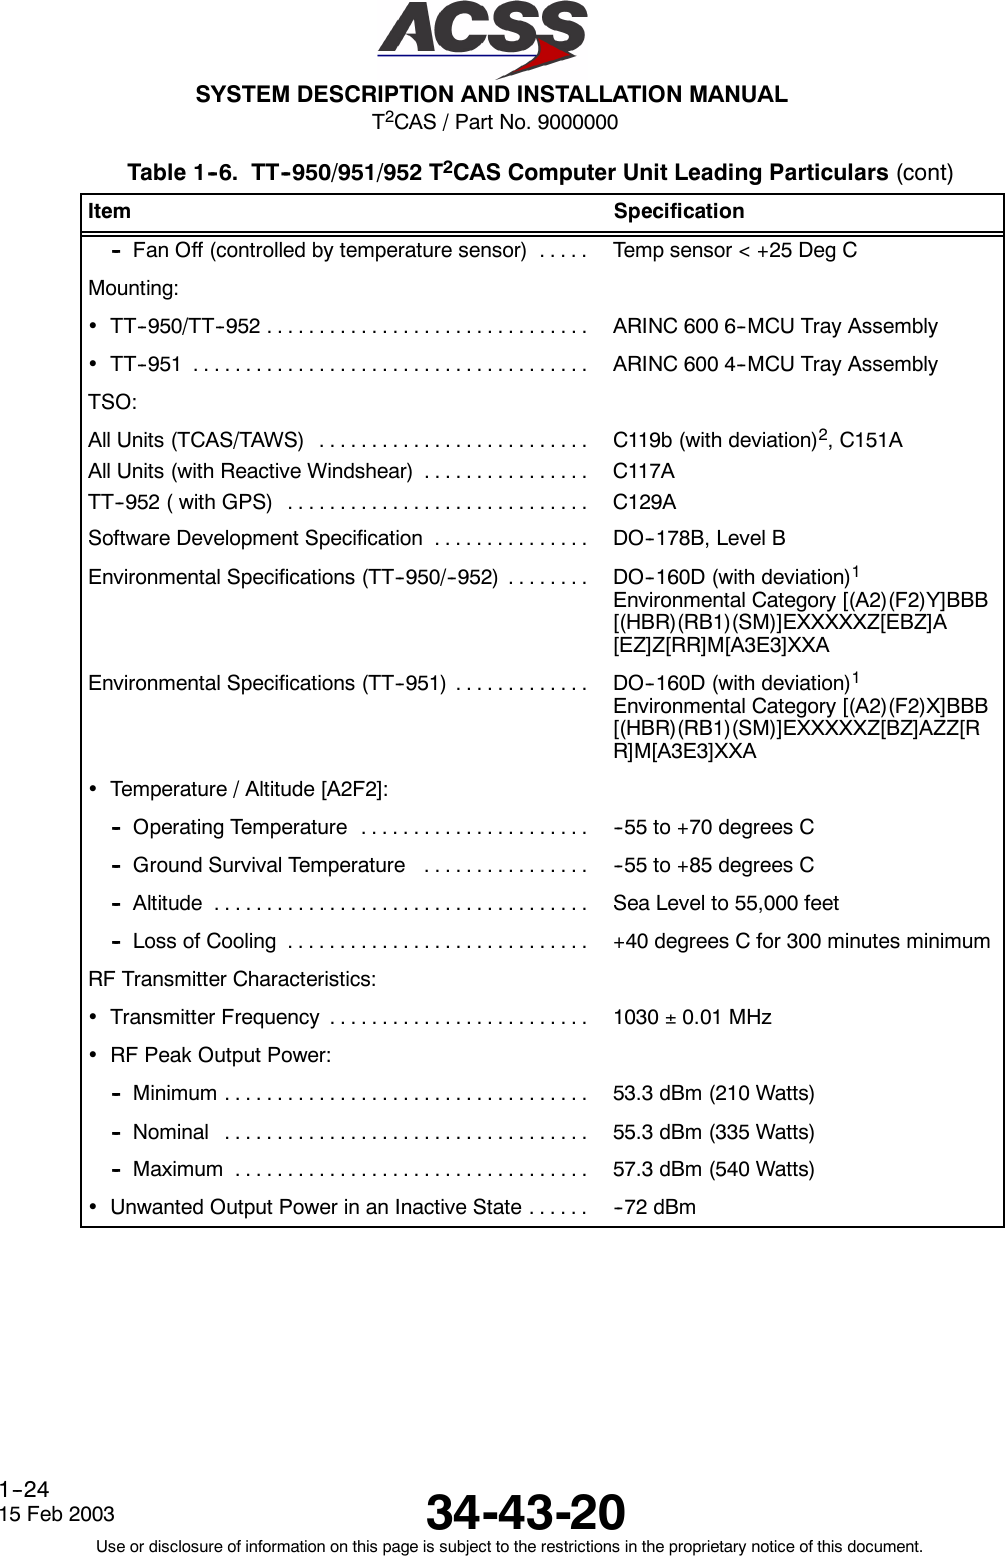 T2CAS / Part No. 9000000SYSTEM DESCRIPTION AND INSTALLATION MANUAL34-43-2015 Feb 2003Use or disclosure of information on this page is subject to the restrictions in the proprietary notice of this document.1--24Table 1--6. TT--950/951/952 T2CAS Computer Unit Leading Particulars (cont)Item Specification-- FanOff(controlledbytemperaturesensor) ..... Temp sensor &lt; +25 Deg CMounting:•TT--950/TT--952 ............................... ARINC 600 6--MCU Tray Assembly•TT--951 ...................................... ARINC 600 4--MCU Tray AssemblyTSO:AllUnits(TCAS/TAWS) ..........................All Units (with Reactive Windshear) ................TT--952(withGPS) .............................C119b (with deviation)2, C151AC117AC129ASoftwareDevelopmentSpecification ............... DO--178B, Level BEnvironmental Specifications (TT--950/--952) ........ DO--160D (with deviation)1Environmental Category [(A2)(F2)Y]BBB[(HBR)(RB1)(SM)]EXXXXXZ[EBZ]A[EZ]Z[RR]M[A3E3]XXAEnvironmental Specifications (TT--951) ............. DO--160D (with deviation)1Environmental Category [(A2)(F2)X]BBB[(HBR)(RB1)(SM)]EXXXXXZ[BZ]AZZ[RR]M[A3E3]XXA•Temperature / Altitude [A2F2]:-- OperatingTemperature ...................... --55 to +70 degrees C-- Ground Survival Temperature ................ --55 to +85 degrees C-- Altitude .................................... Sea Level to 55,000 feet-- LossofCooling ............................. +40 degrees C for 300 minutes minimumRF Transmitter Characteristics:•Transmitter Frequency ......................... 1030 ±0.01 MHz•RF Peak Output Power:-- Minimum................................... 53.3 dBm (210 Watts)-- Nominal ................................... 55.3 dBm (335 Watts)-- Maximum .................................. 57.3 dBm (540 Watts)•UnwantedOutputPowerinanInactiveState...... --72 dBm